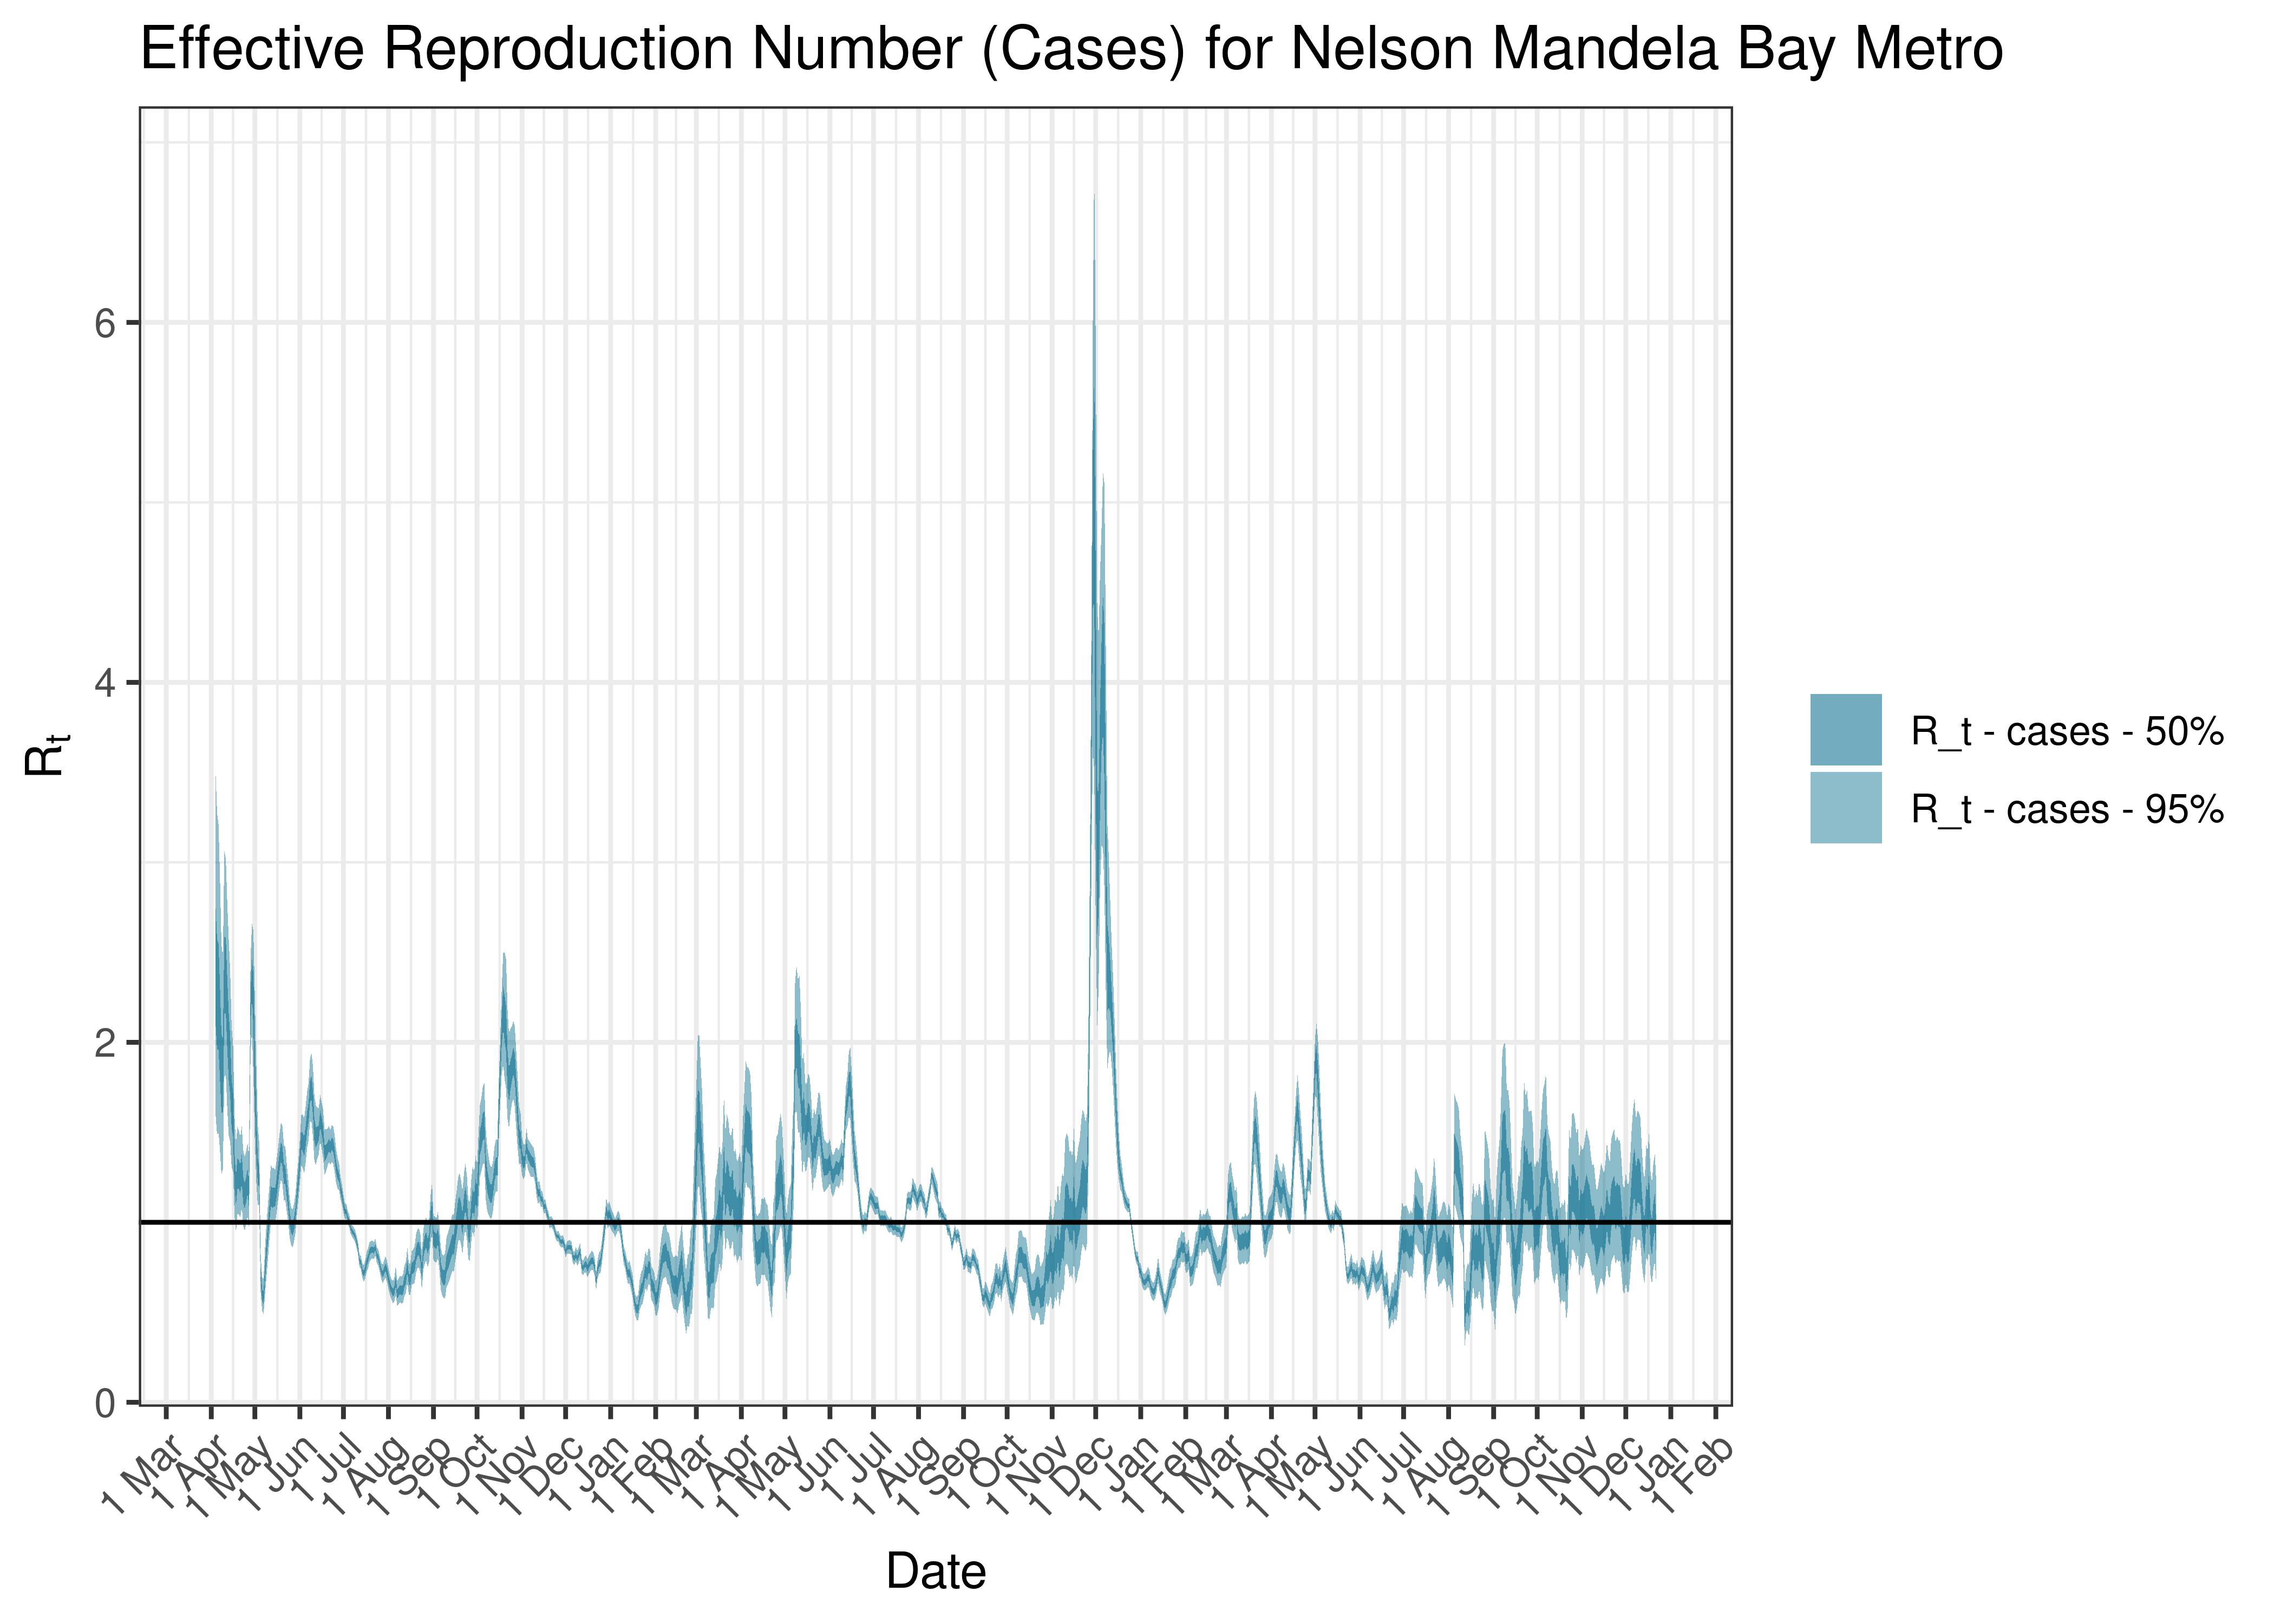 Estimated Effective Reproduction Number Based on Cases for Nelson Mandela Bay Metro since 1 April 2020